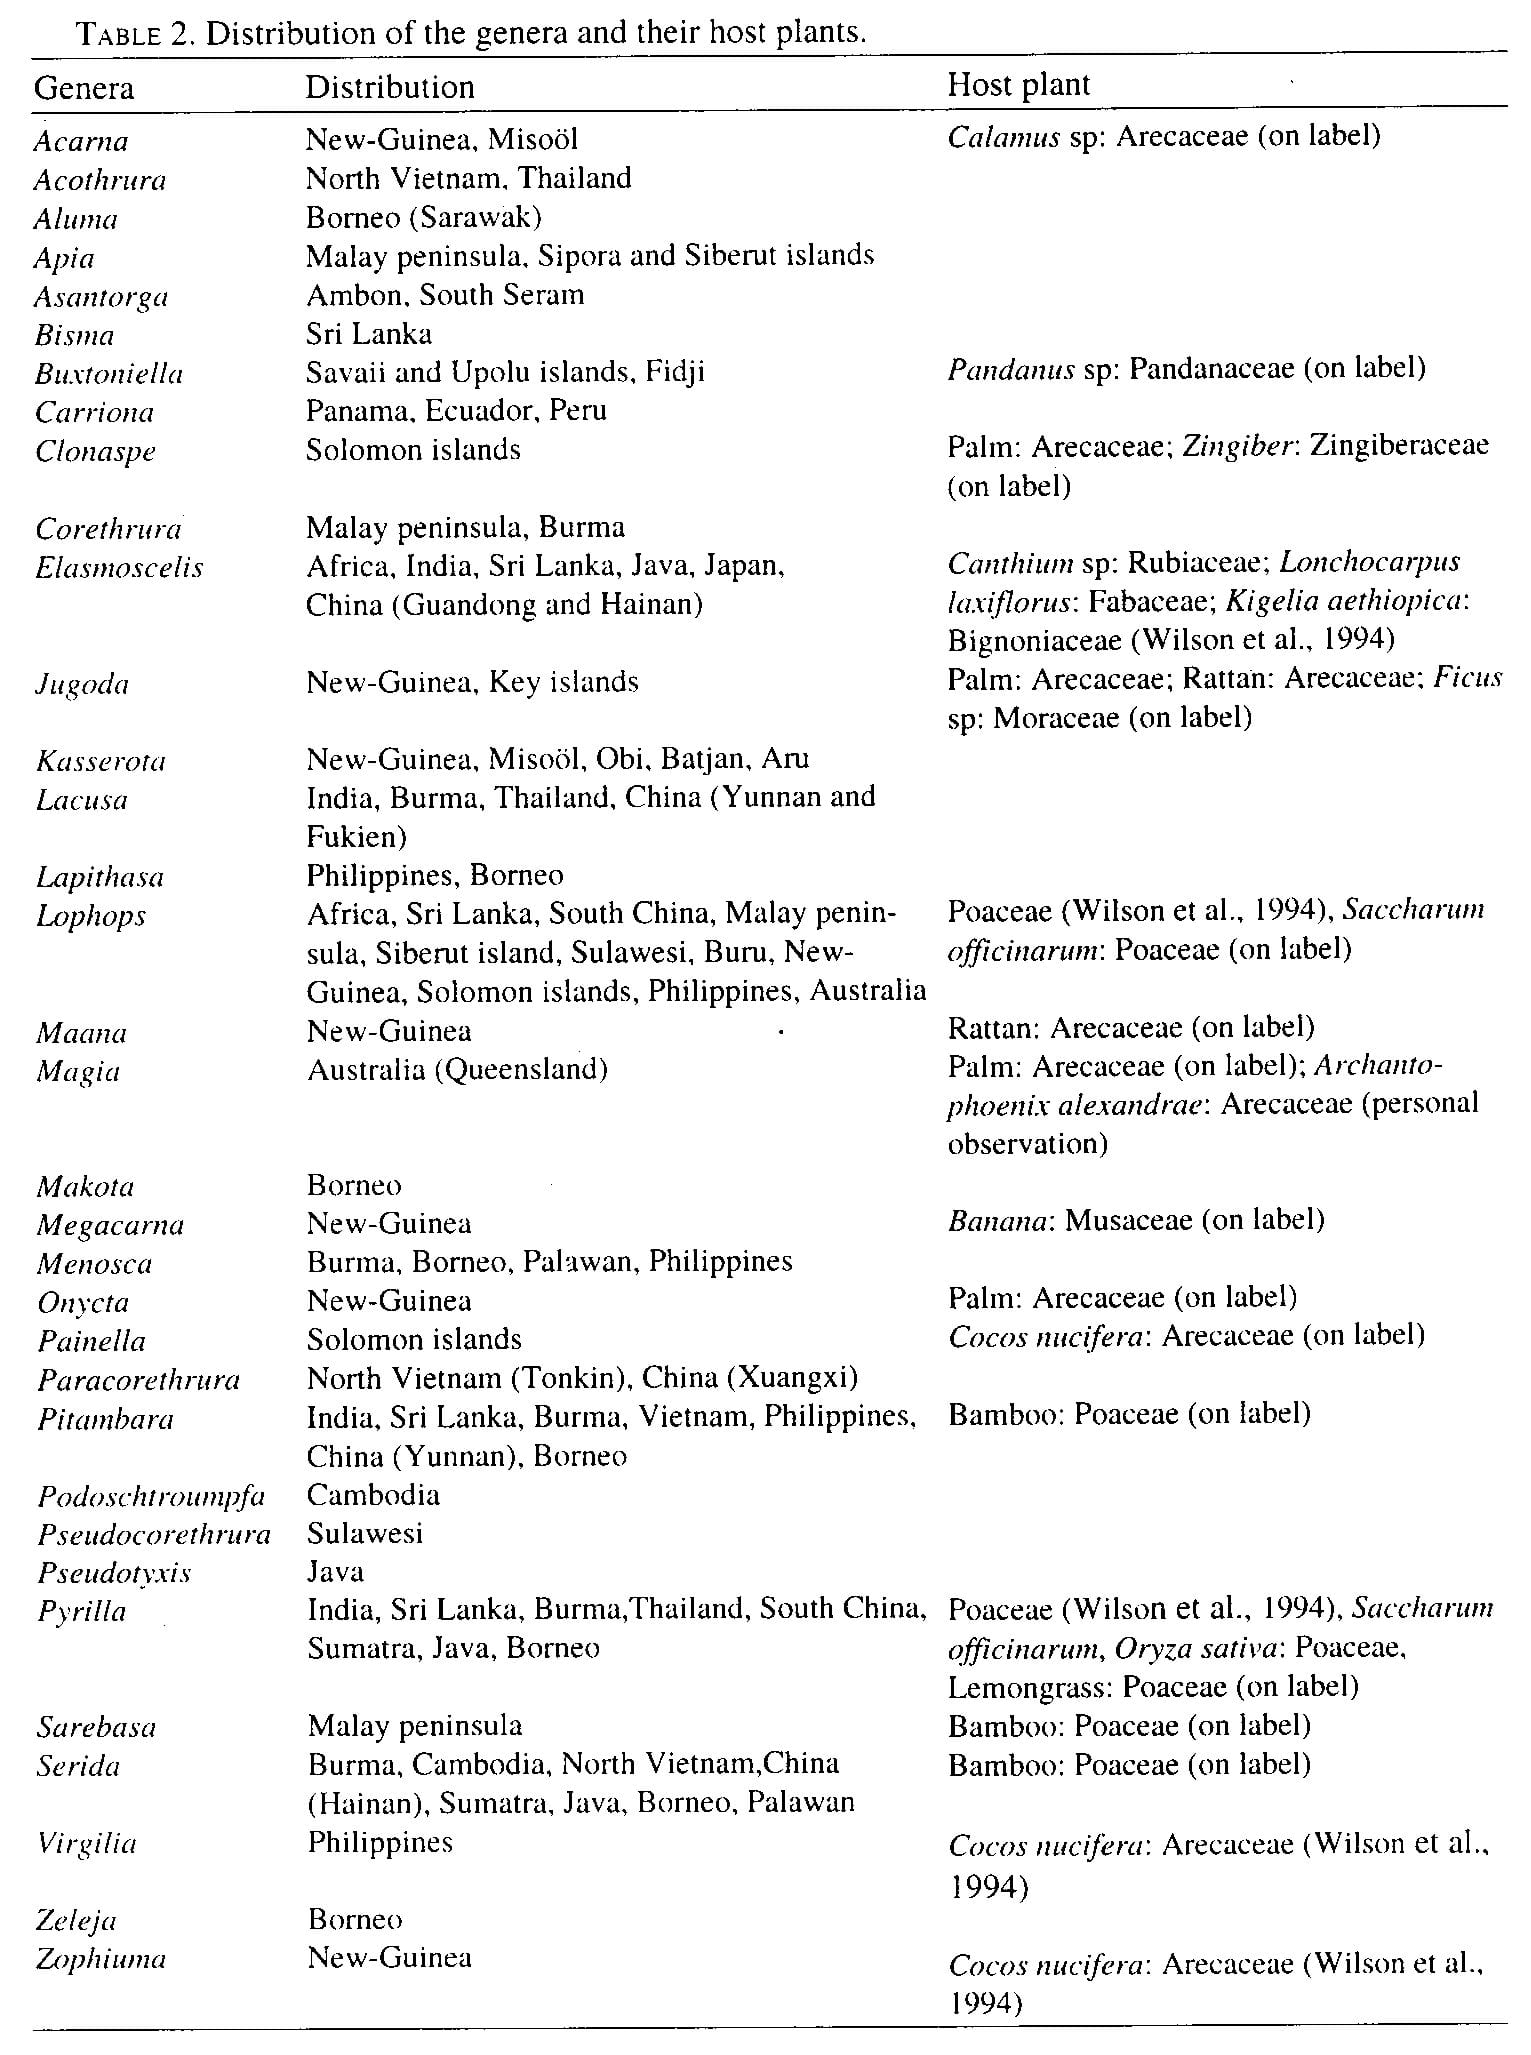 Summary of plant associations and biogeography of Lophopidae from Soulier-Perkins